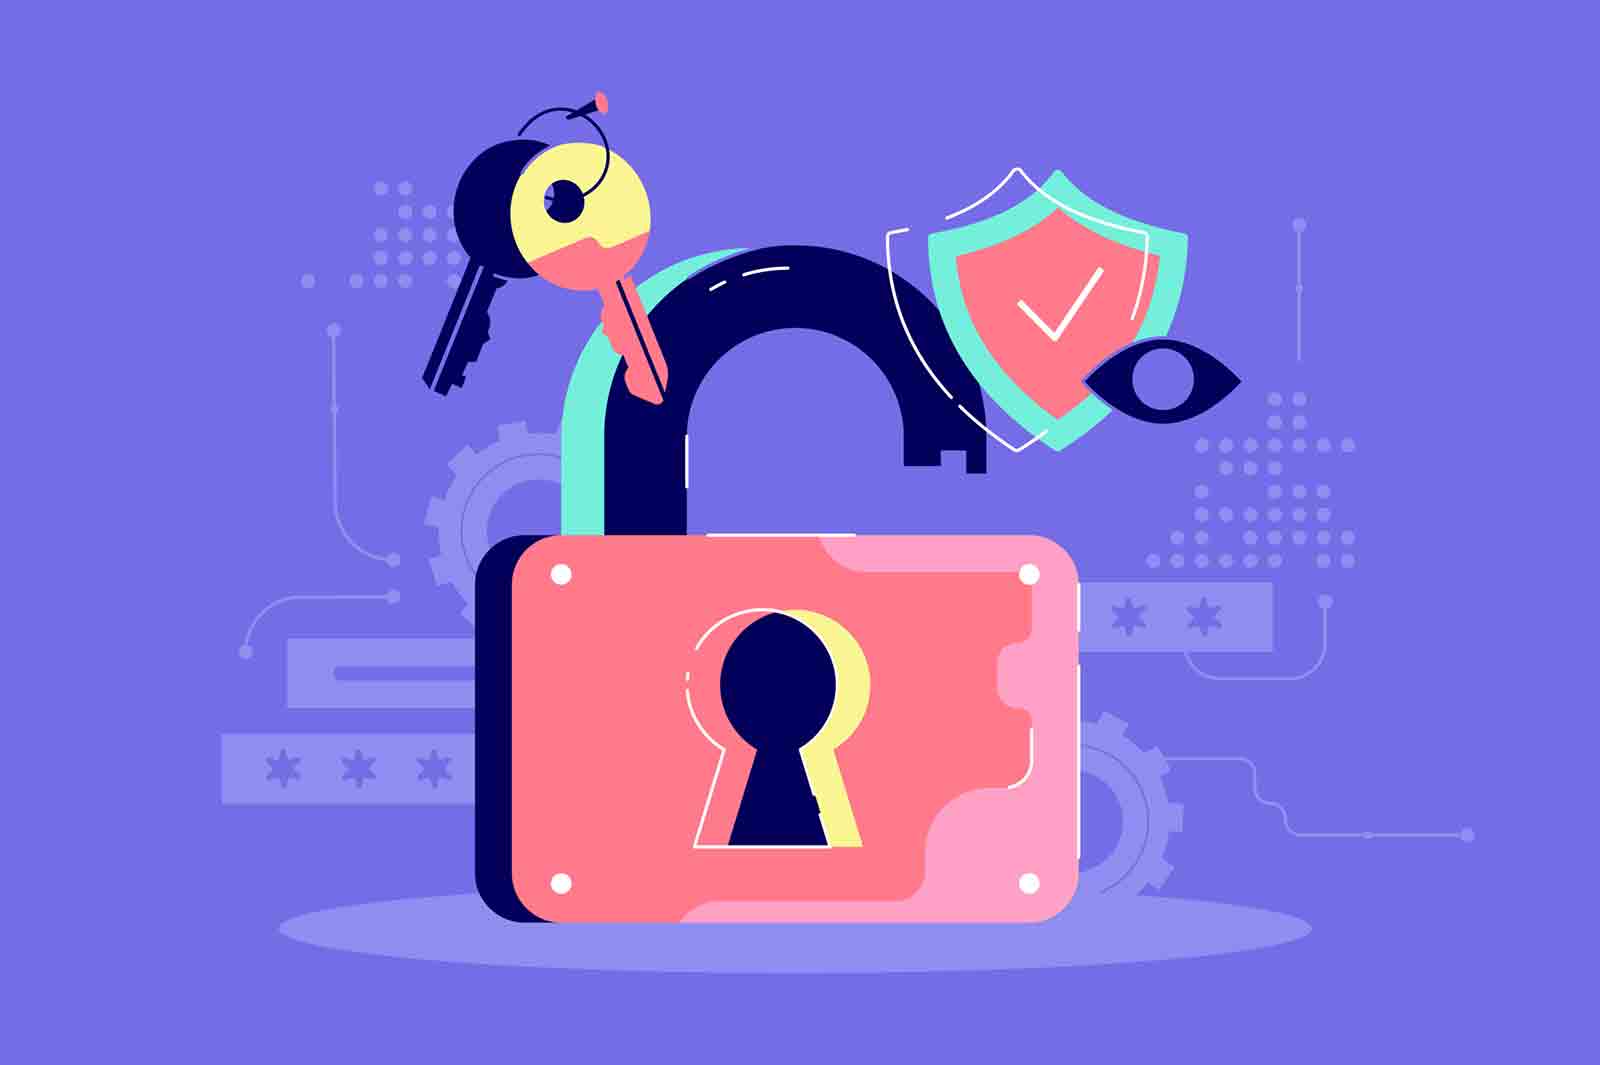 Password security icon of key, protection and open lock. Symbol concept online, internet and web safety in network. Vector illustration.